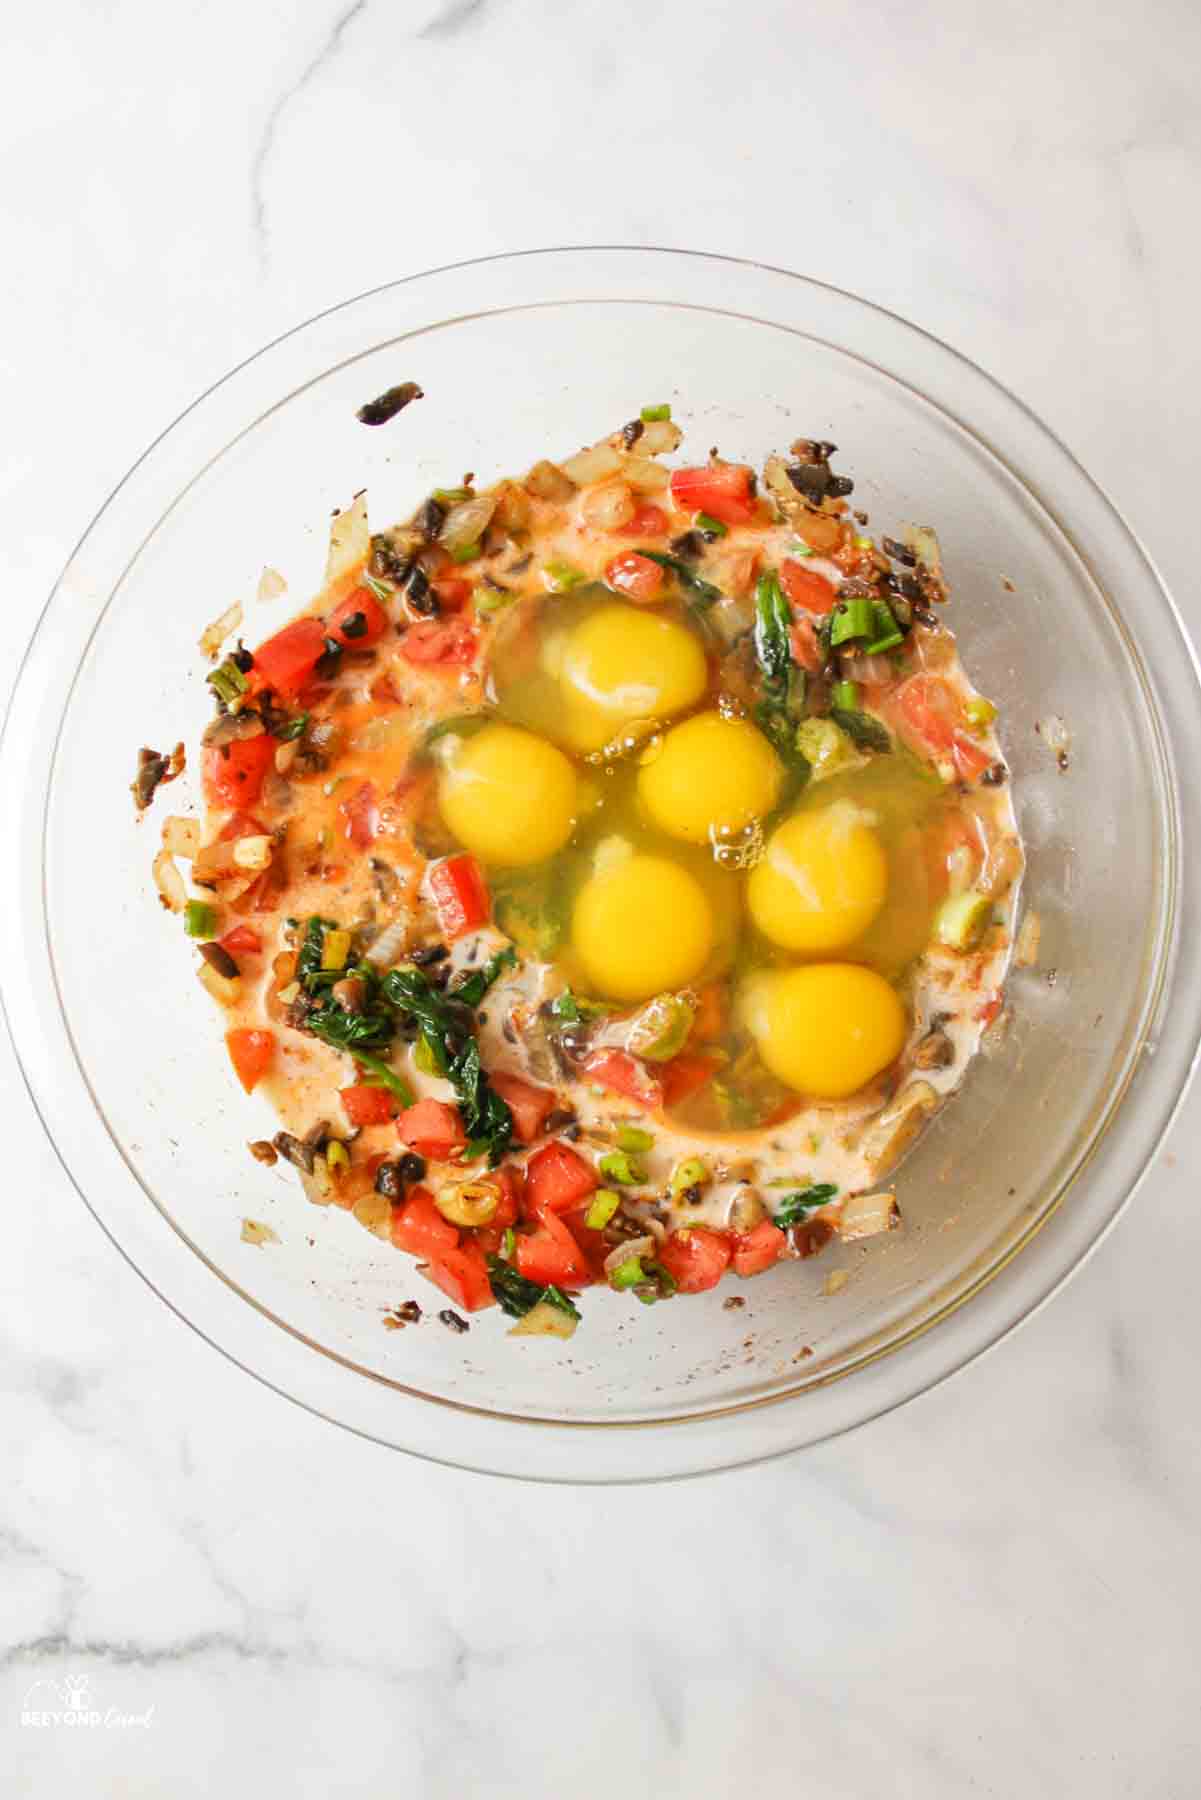 eggs and milk added to veggies in a bowl